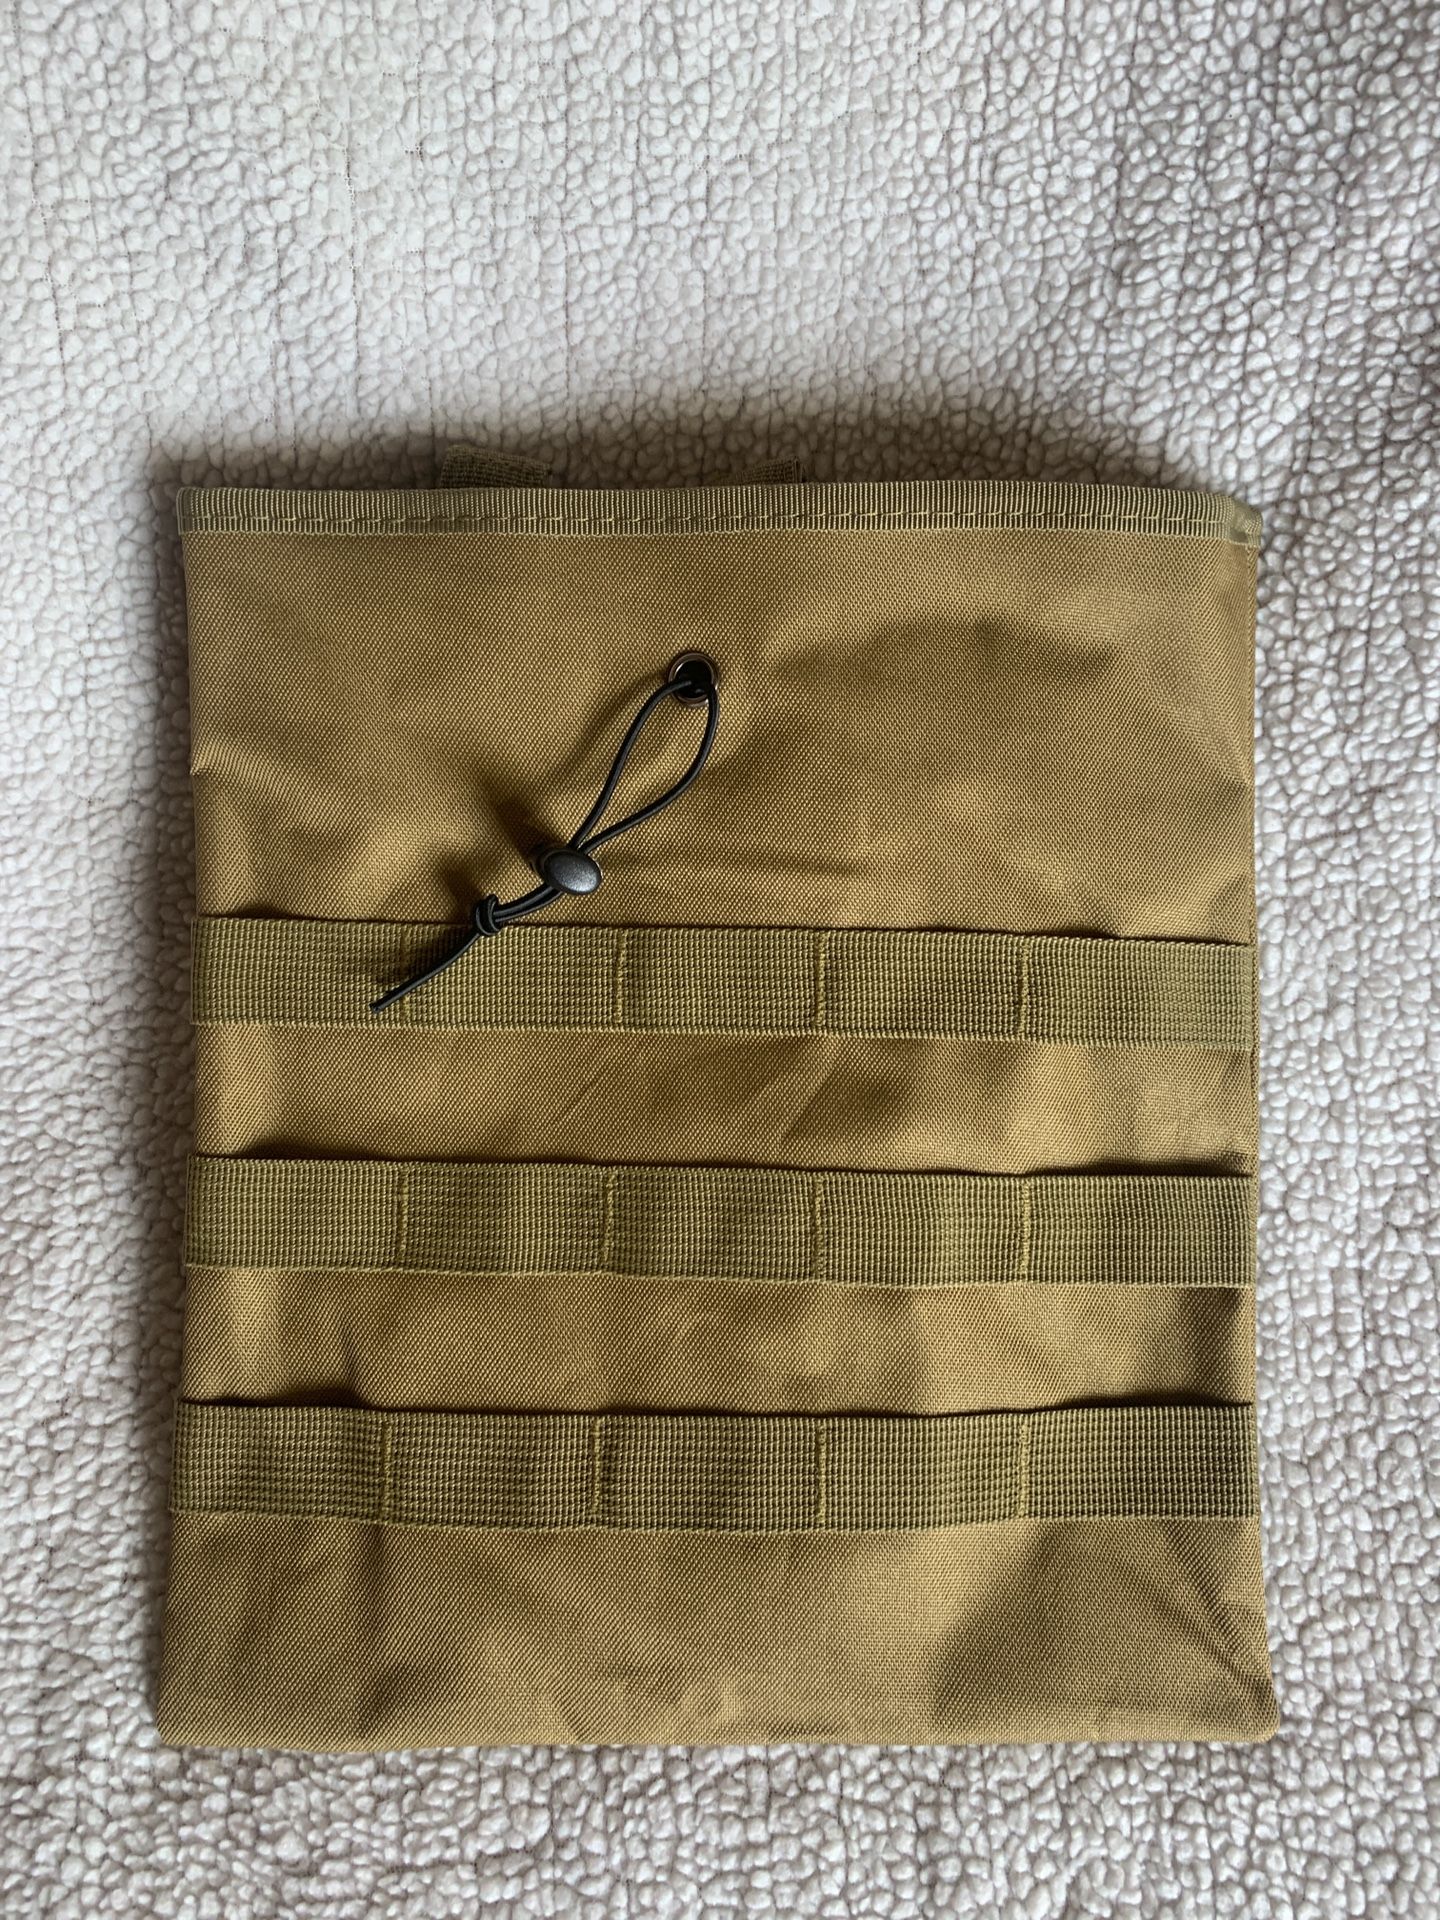 Molle Document Protector 11.5”L x 10.25”W, Brown